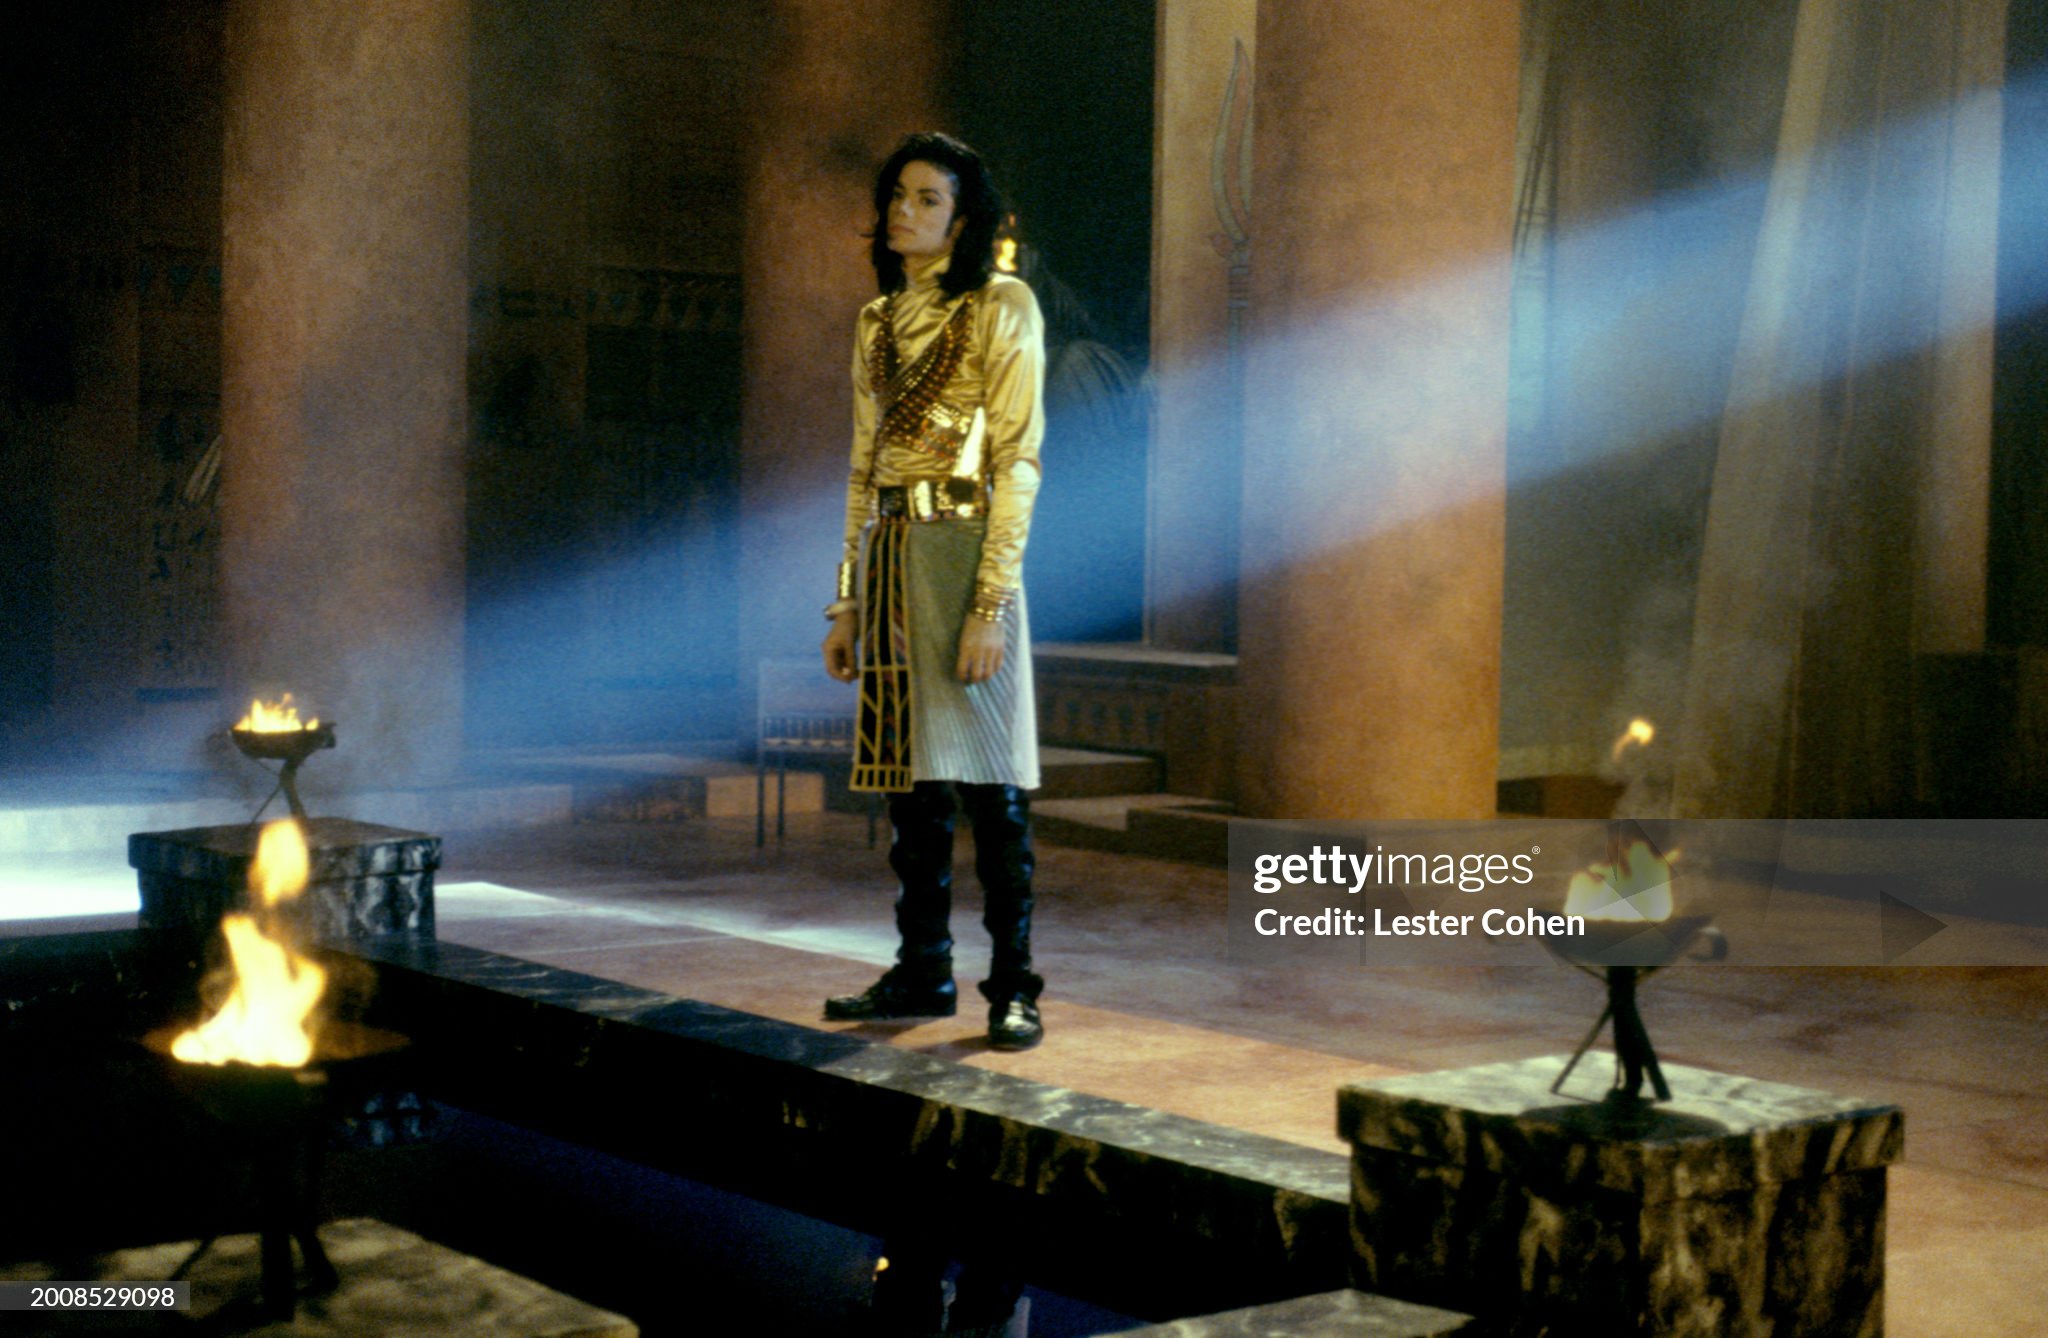 american-singer-michael-jackson-poses-for-a-portrait-on-the-set-of-his-1992-single-music-video.jpg